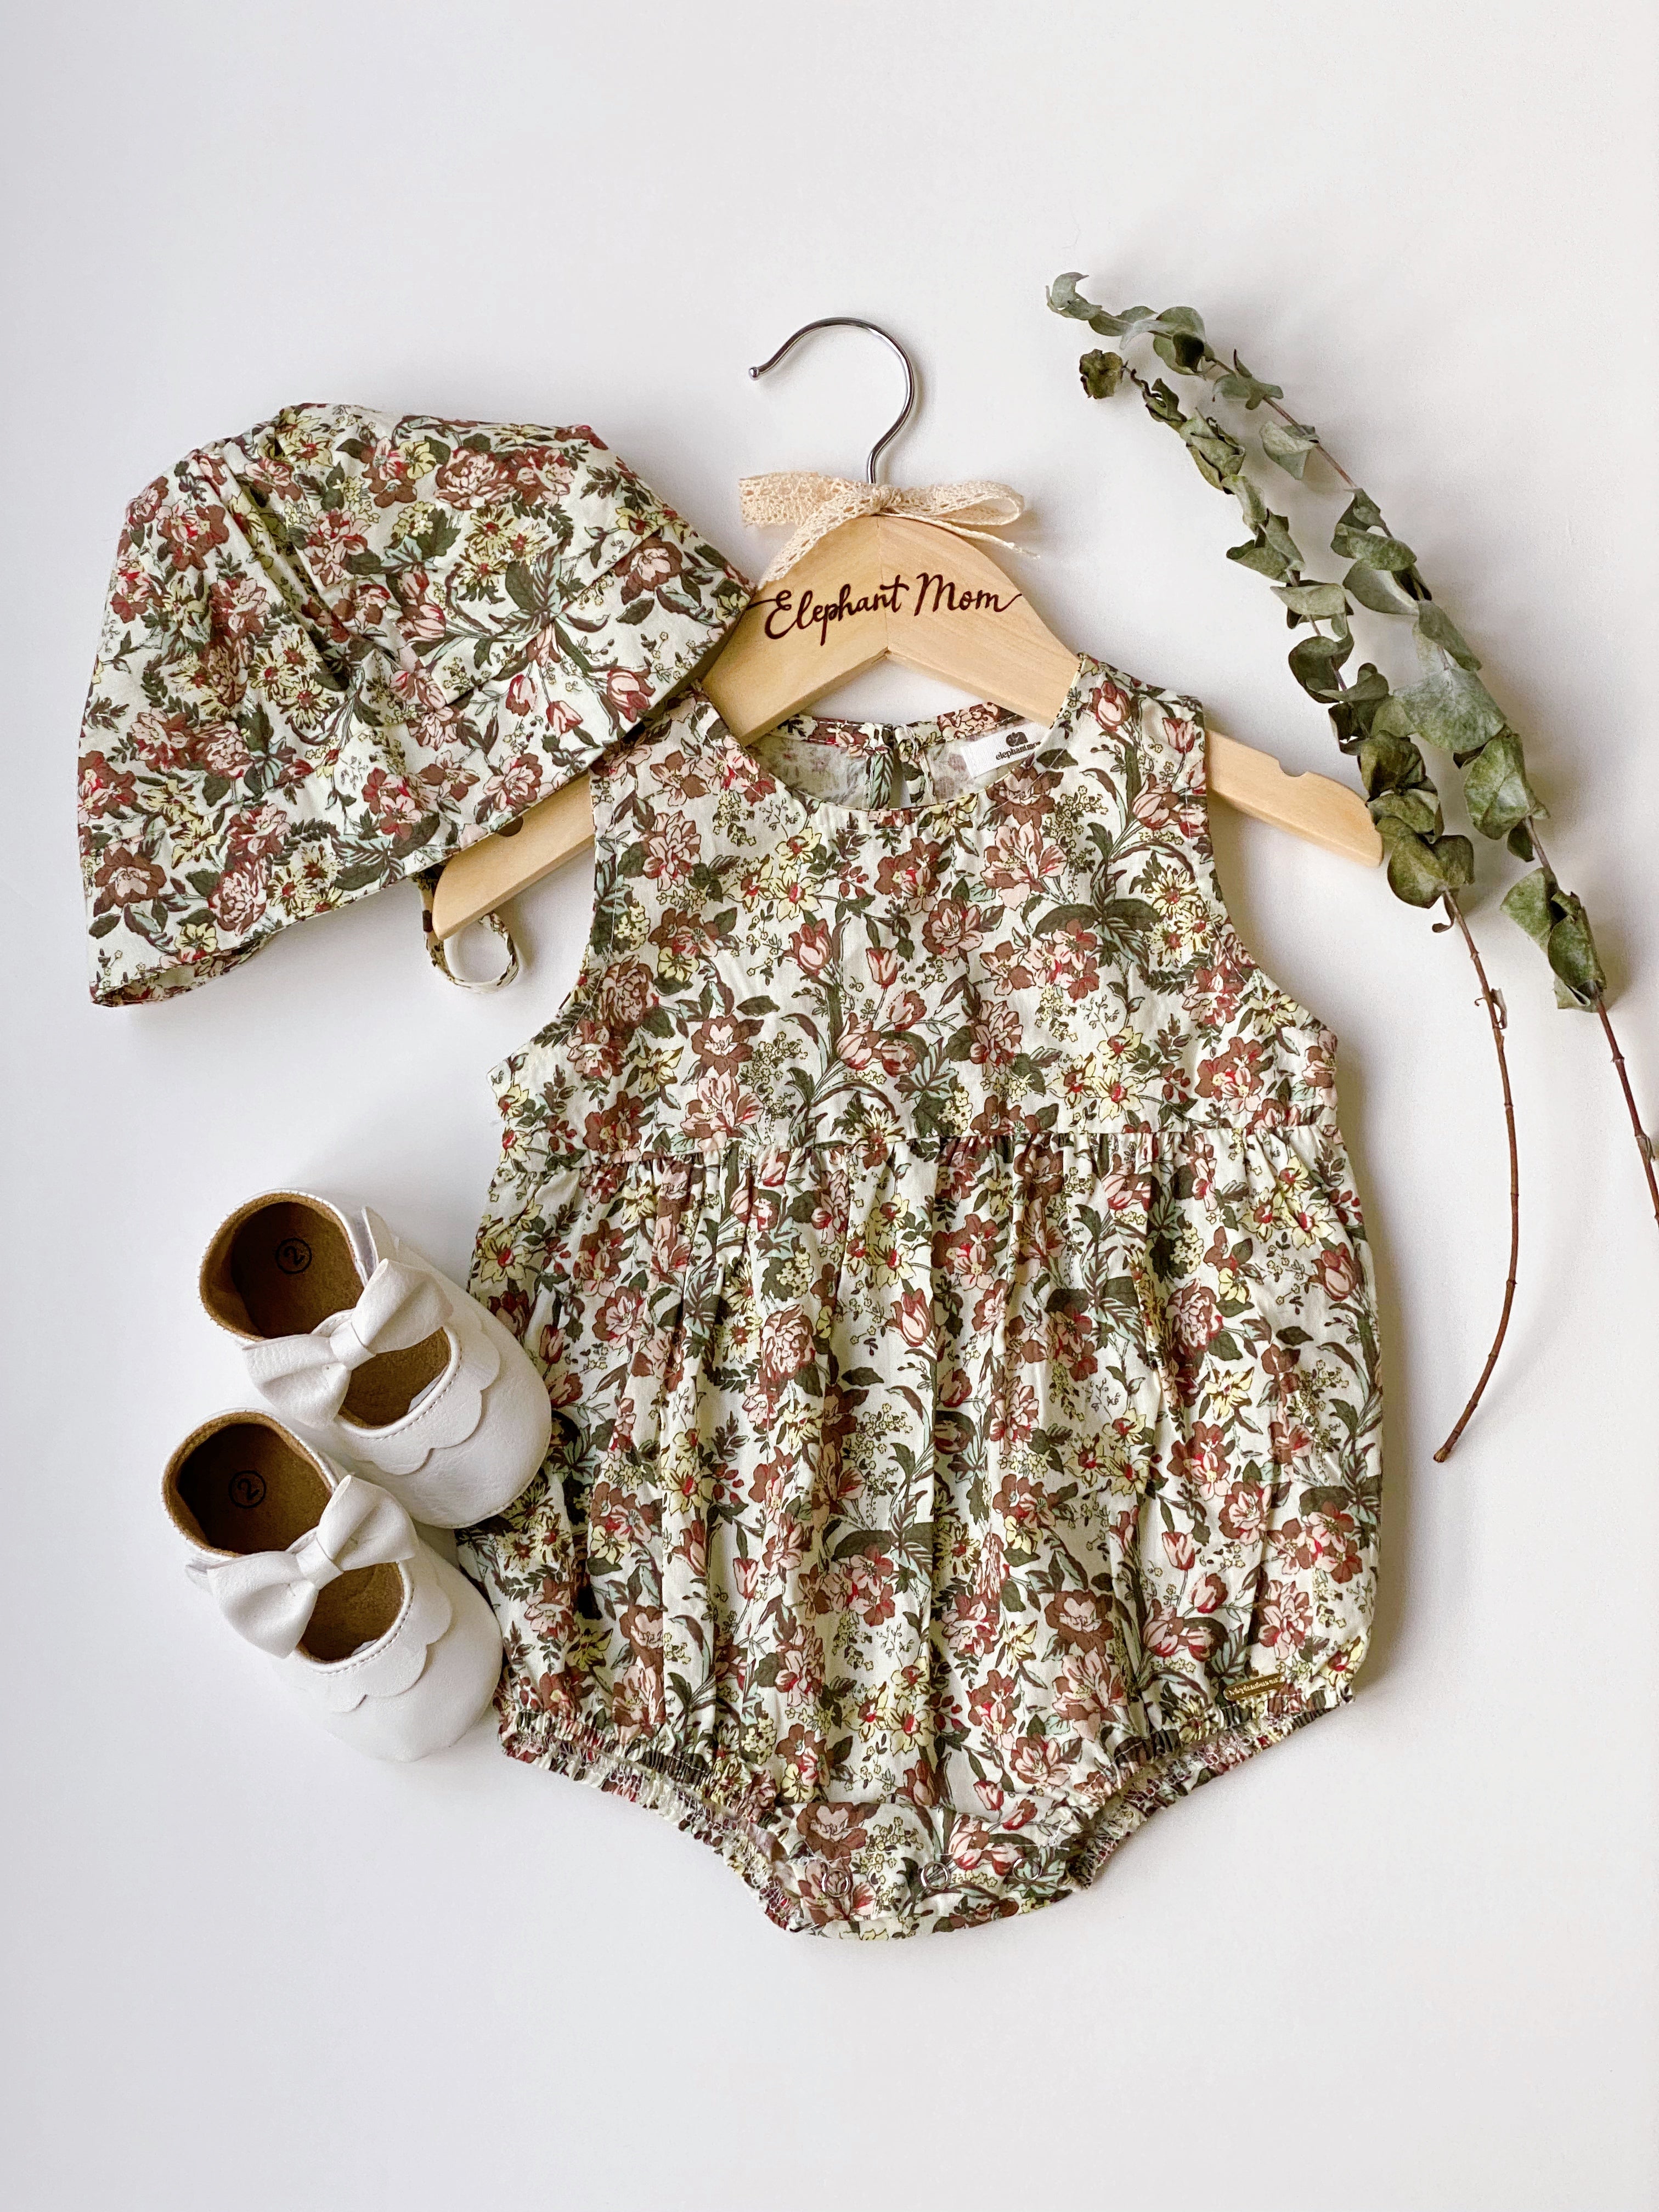 Wildflowers Jumpsuit Baby Dress and Hats – Elephant Mom